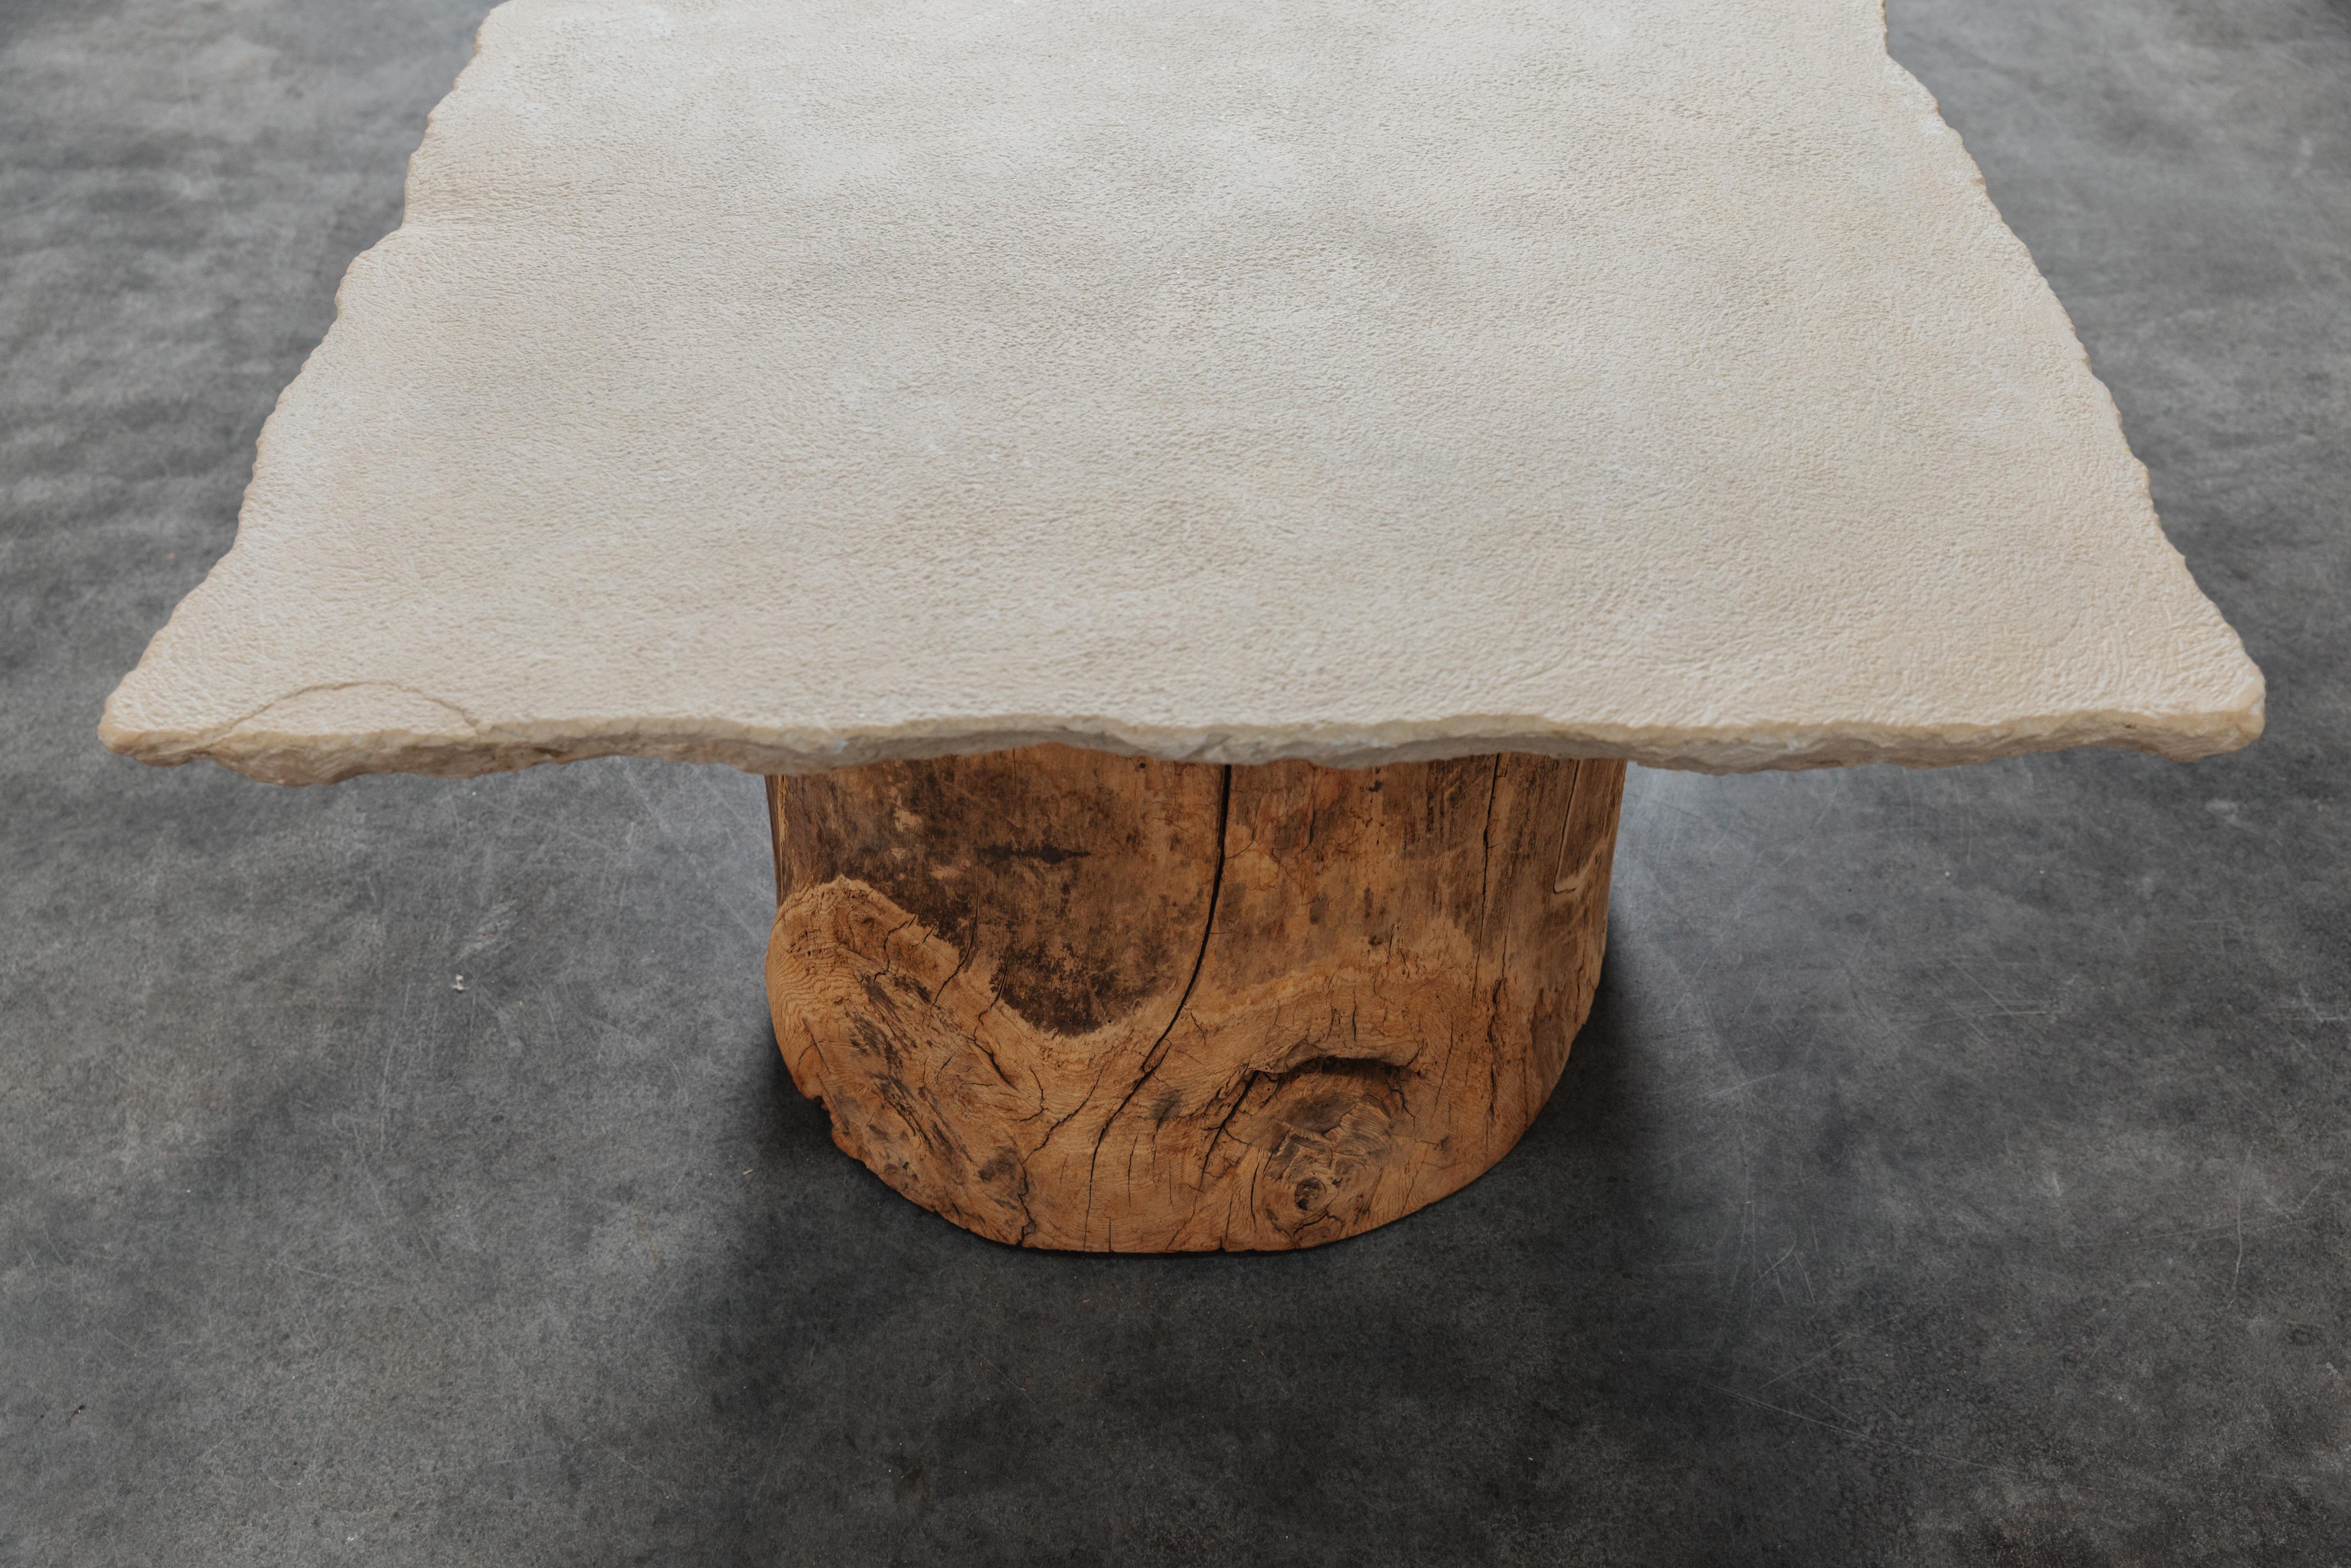 Limestone Vintage Stone Coffee Table From France, Circa 1850 For Sale